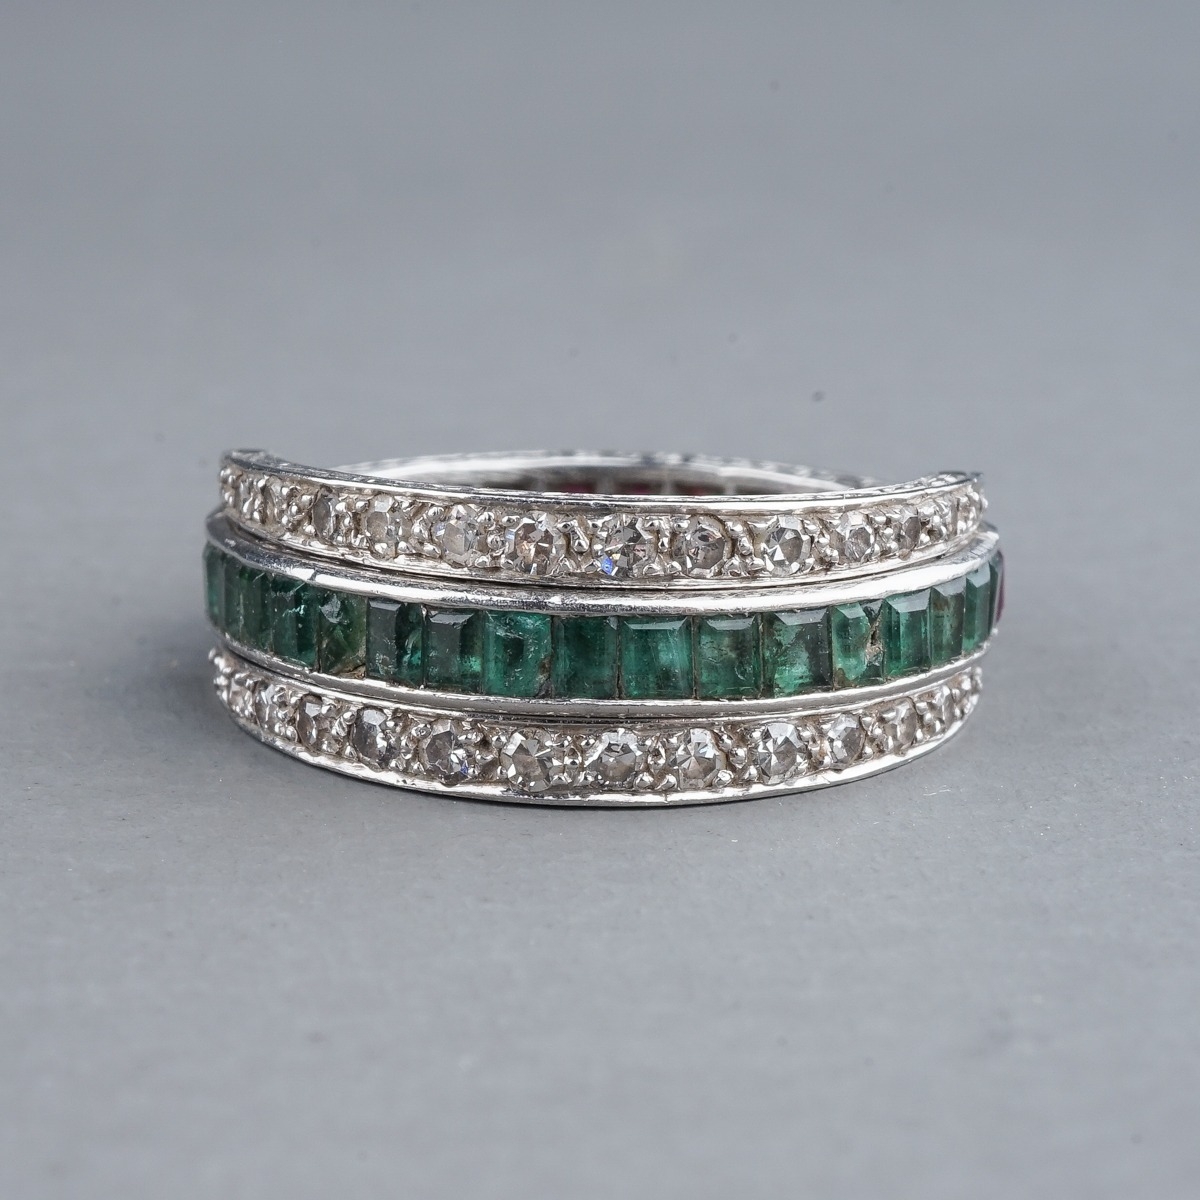 An Art Deco platinum diamond ruby and emerald swivel or flip ring, set with calibre cut rubies and - Image 3 of 6